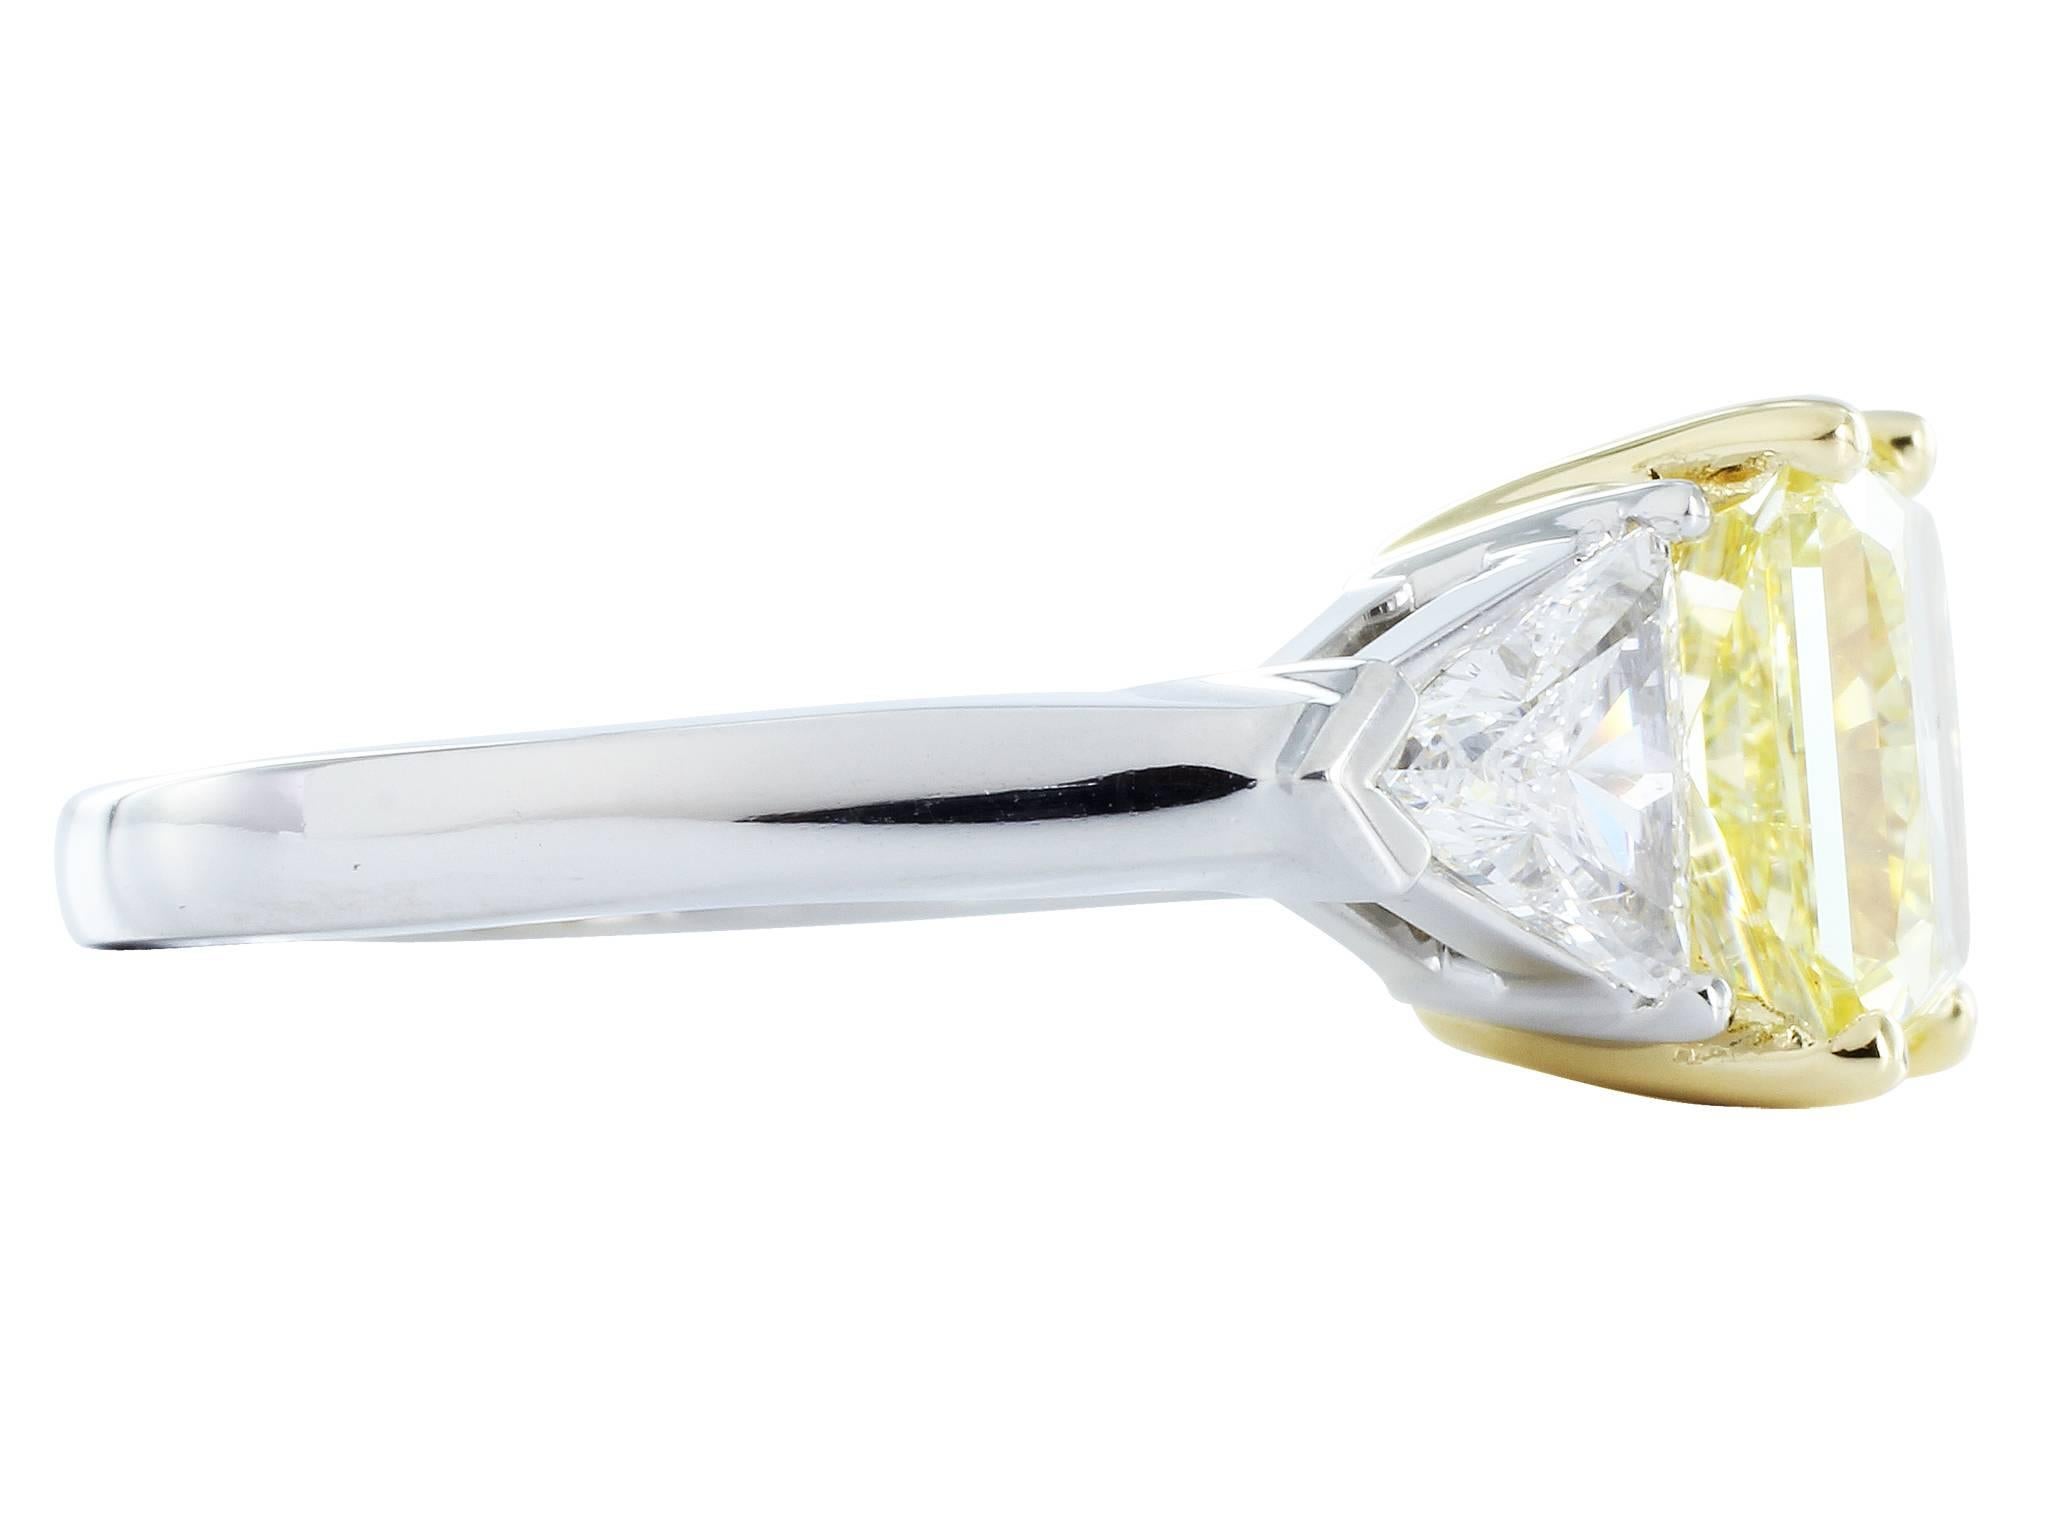 18 karat yellow gold and platinum 3 stone ring. The ring features 1 radiant cut Natural Fancy Intense yellow diamond, weighing 2.50 carats, measuring 7.91 x 7.42 x 4.54 mm with GIA colored diamond report 1122830753. The center stone is flanked by